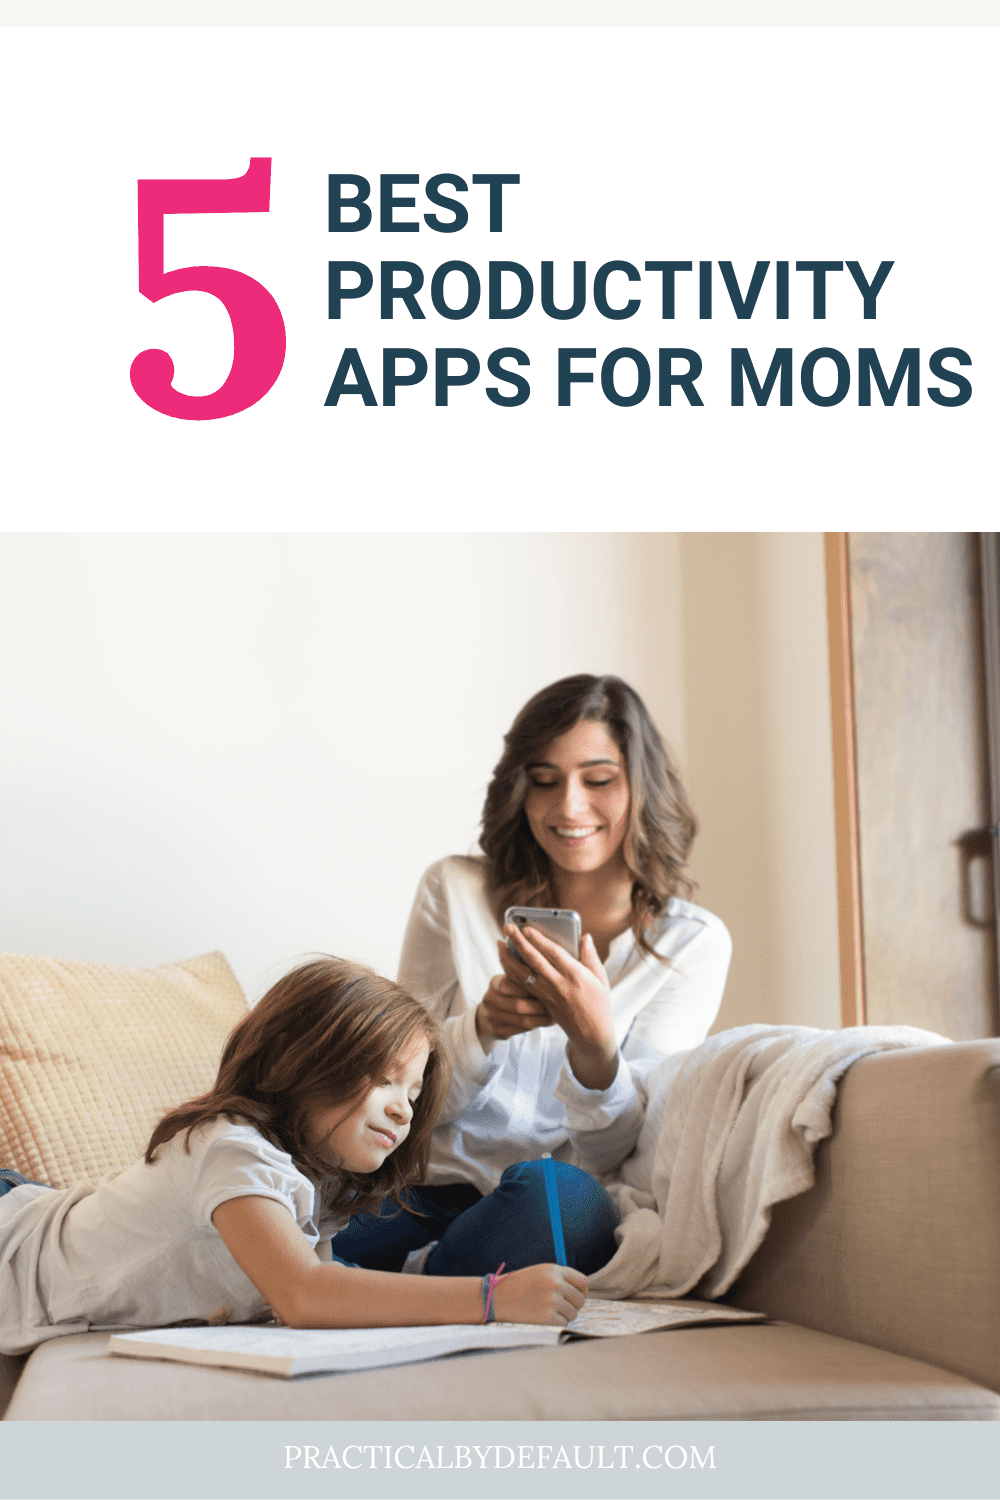 Best Productivity Apps For Moms